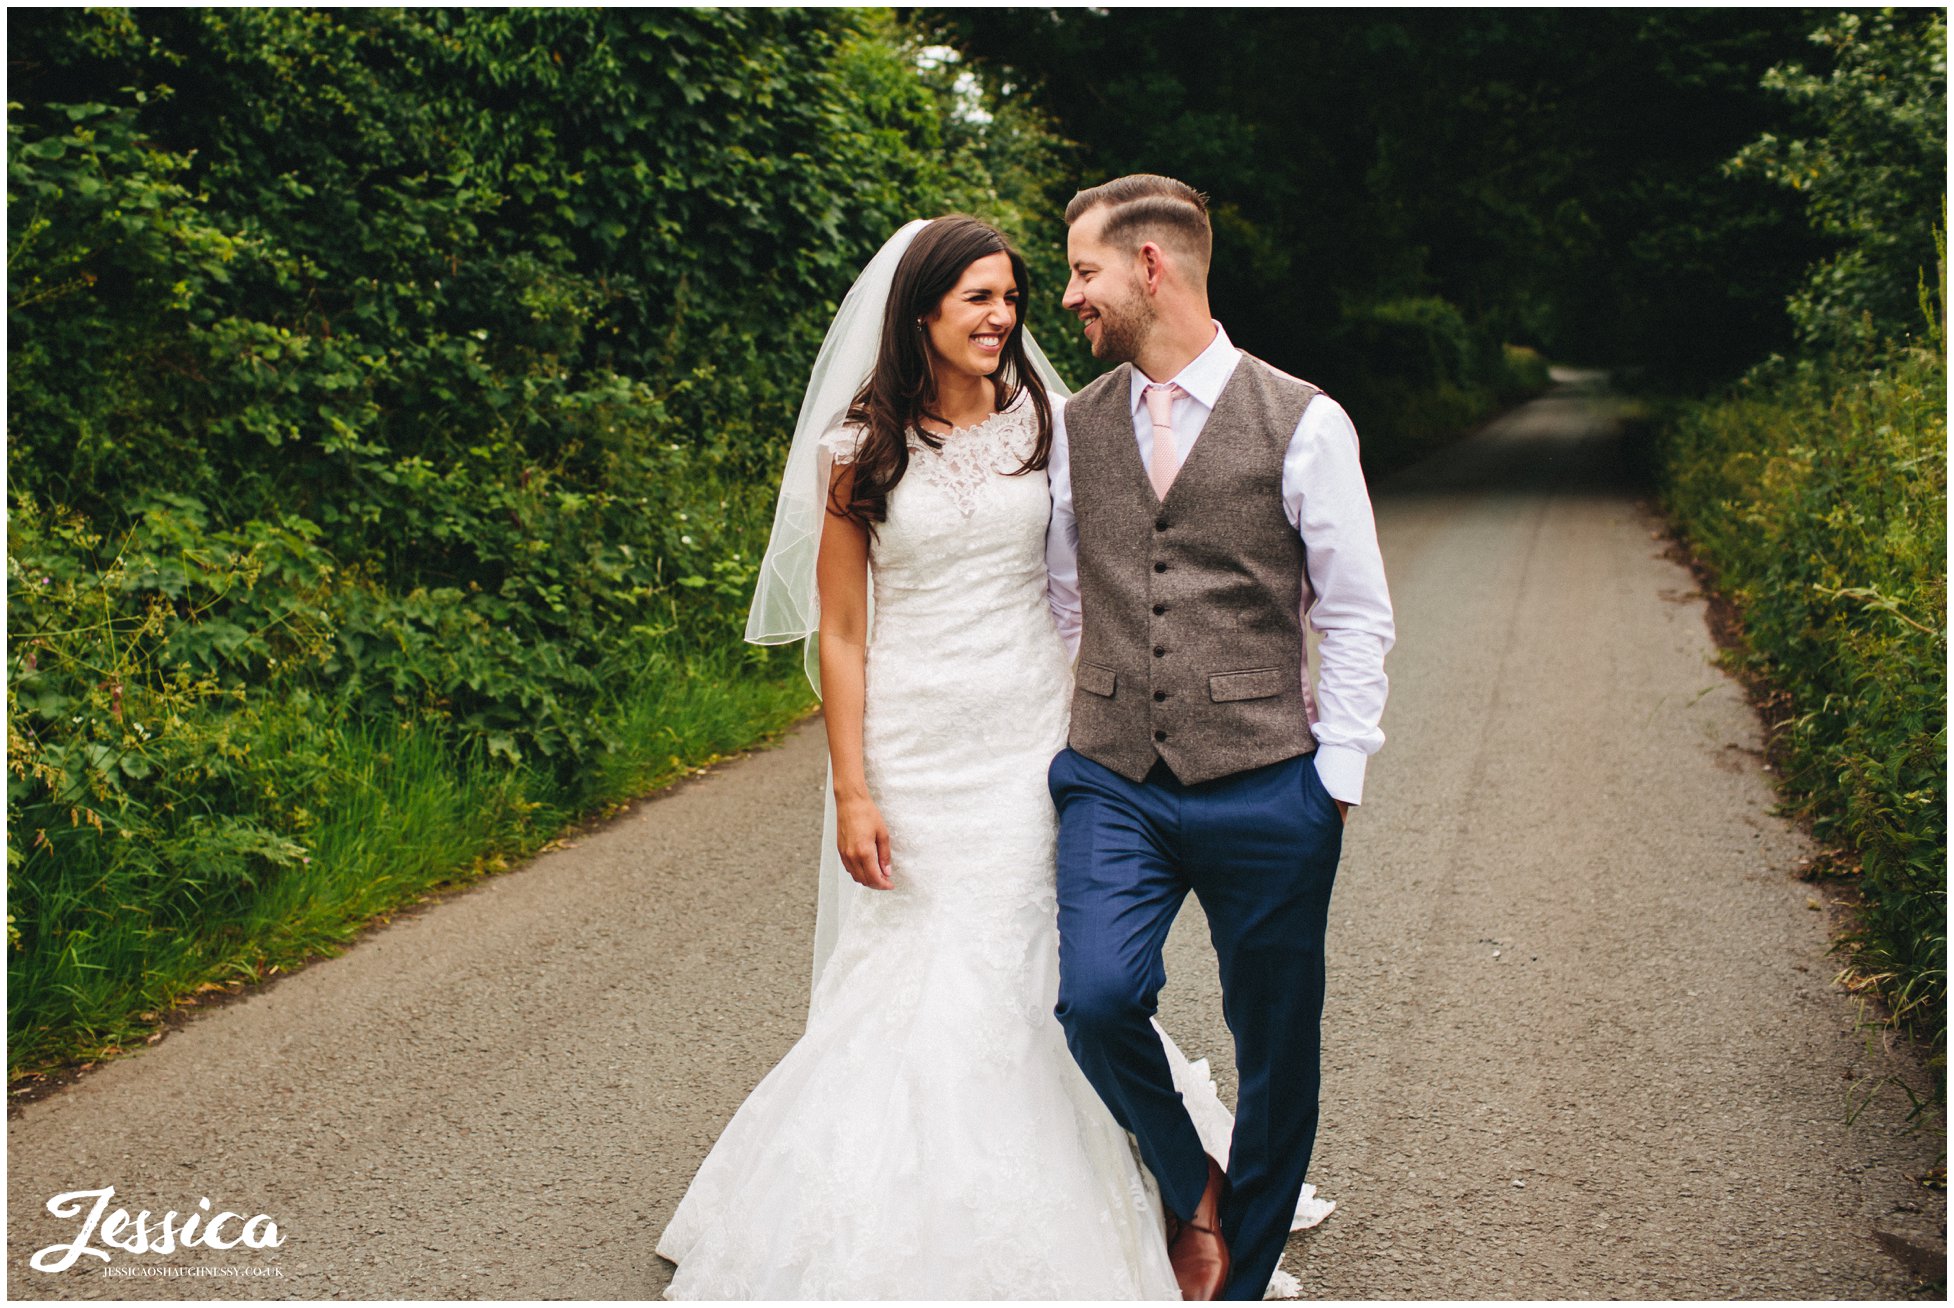 newlywed's walk down country lanes outside their wirral wedding venue